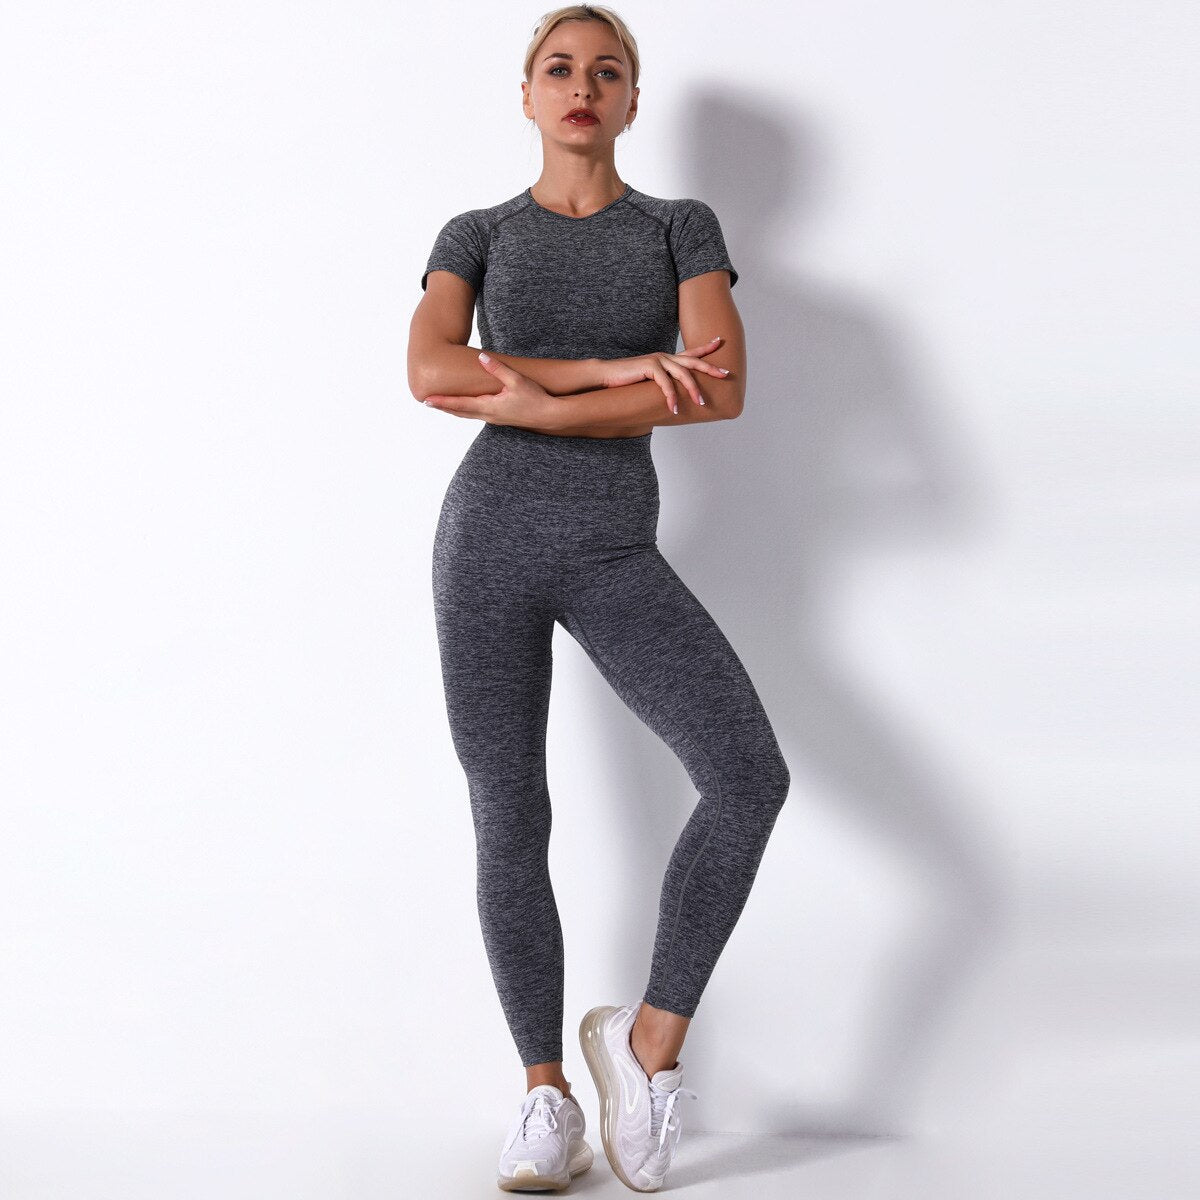 High Waist Seamless 2pc Set of Leggings and top for Running & Yoga for Women, JD Sports, Sports Direct, DecathlonHigh Waist Seamless 2pc Set of Leggings and top for Running & Yoga for Women